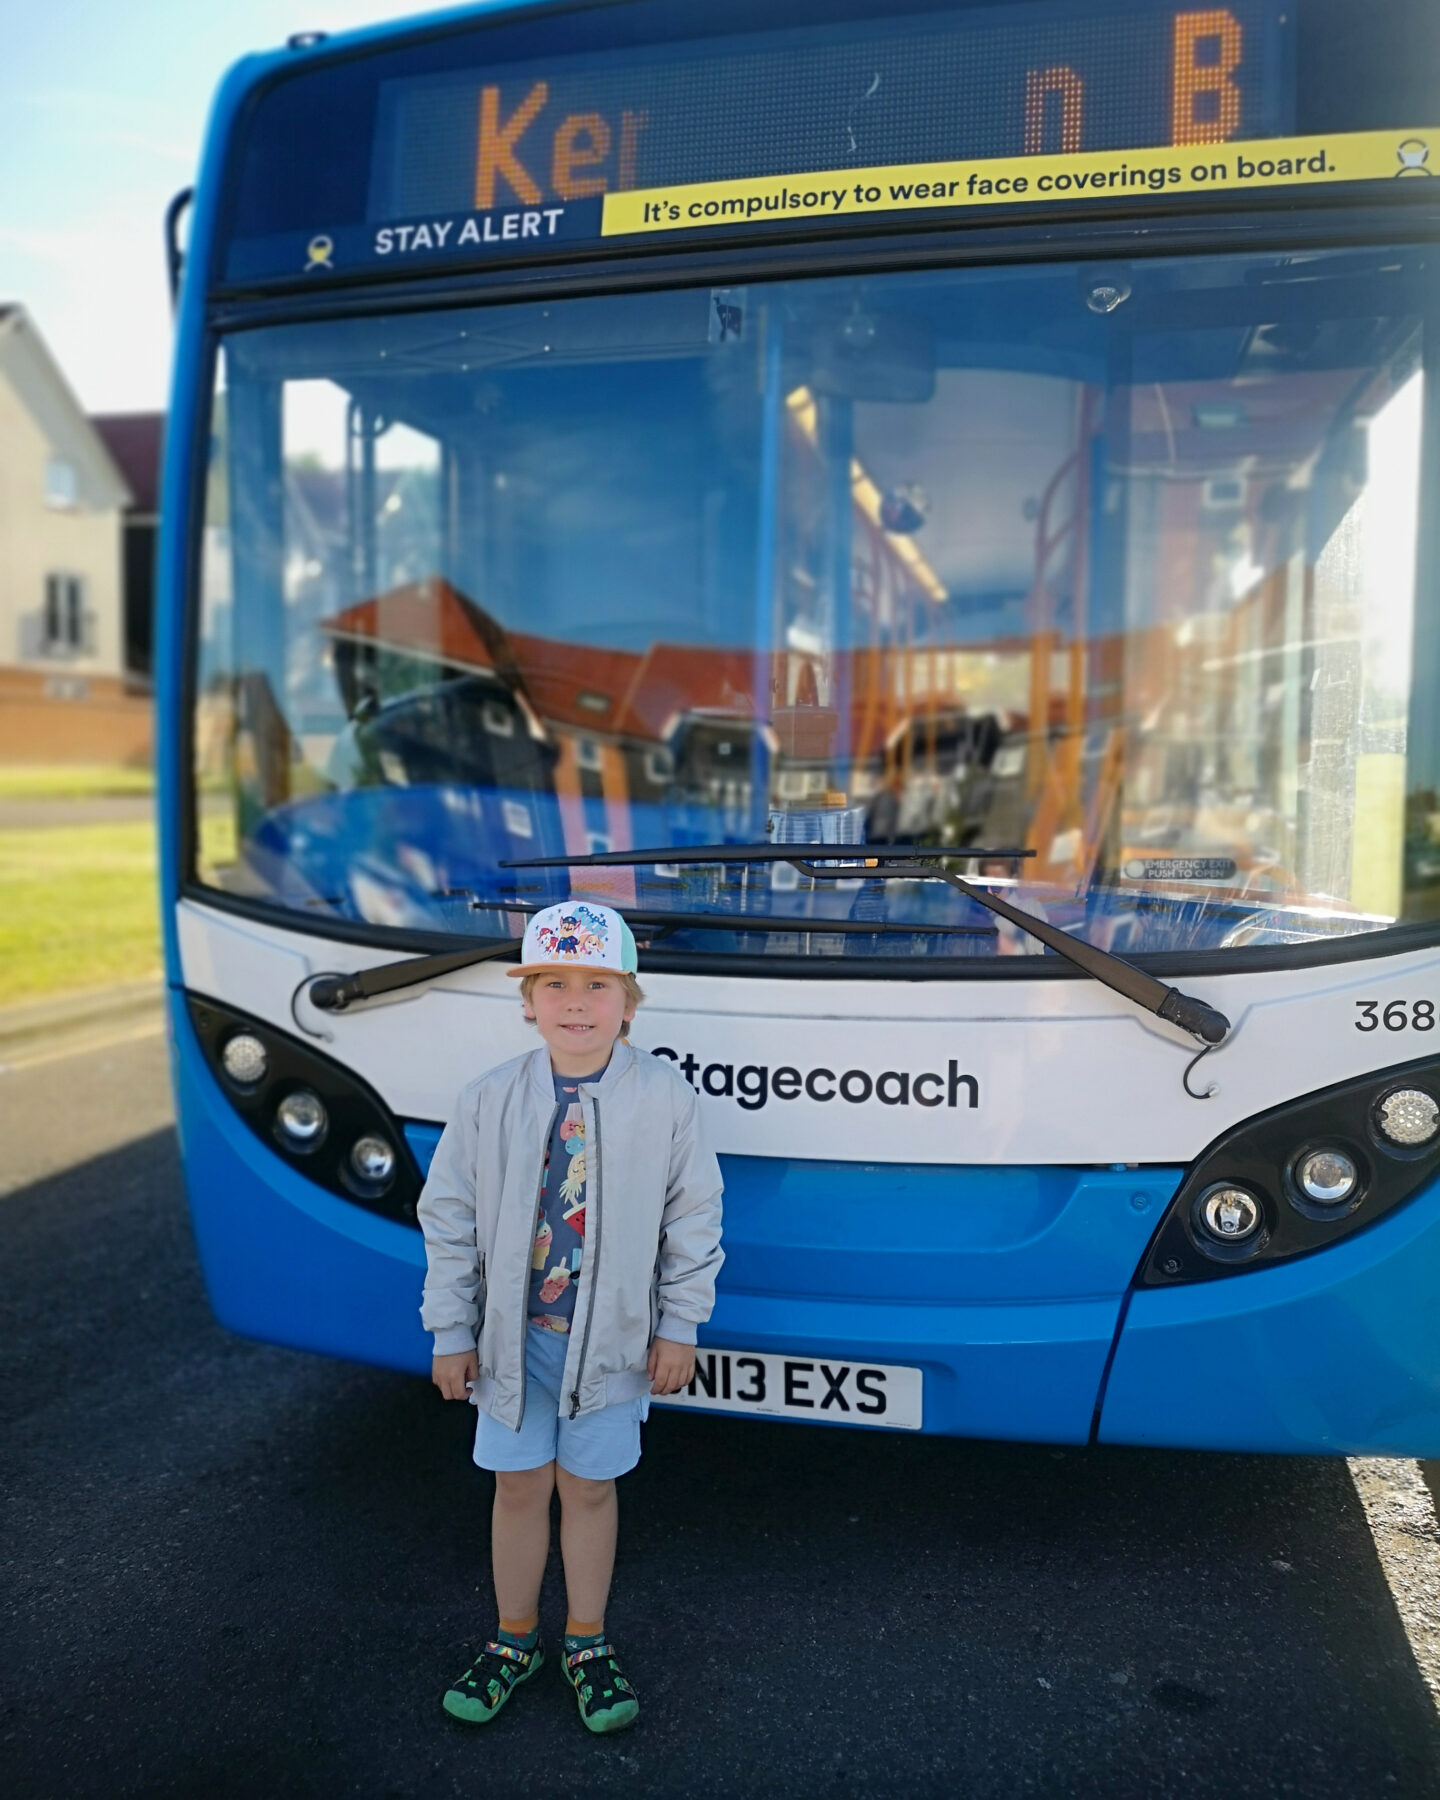  Stagecoach Bus Trip Challenge, StageCoach, Bus Trip, Visit Ashford, Family Time, Kent Life, Ashford Council, Ashford Library, Elwick Place, Stagecoach Bus, the Frenchie Mummy, Family Adventures, Day Trip, Visit Kent